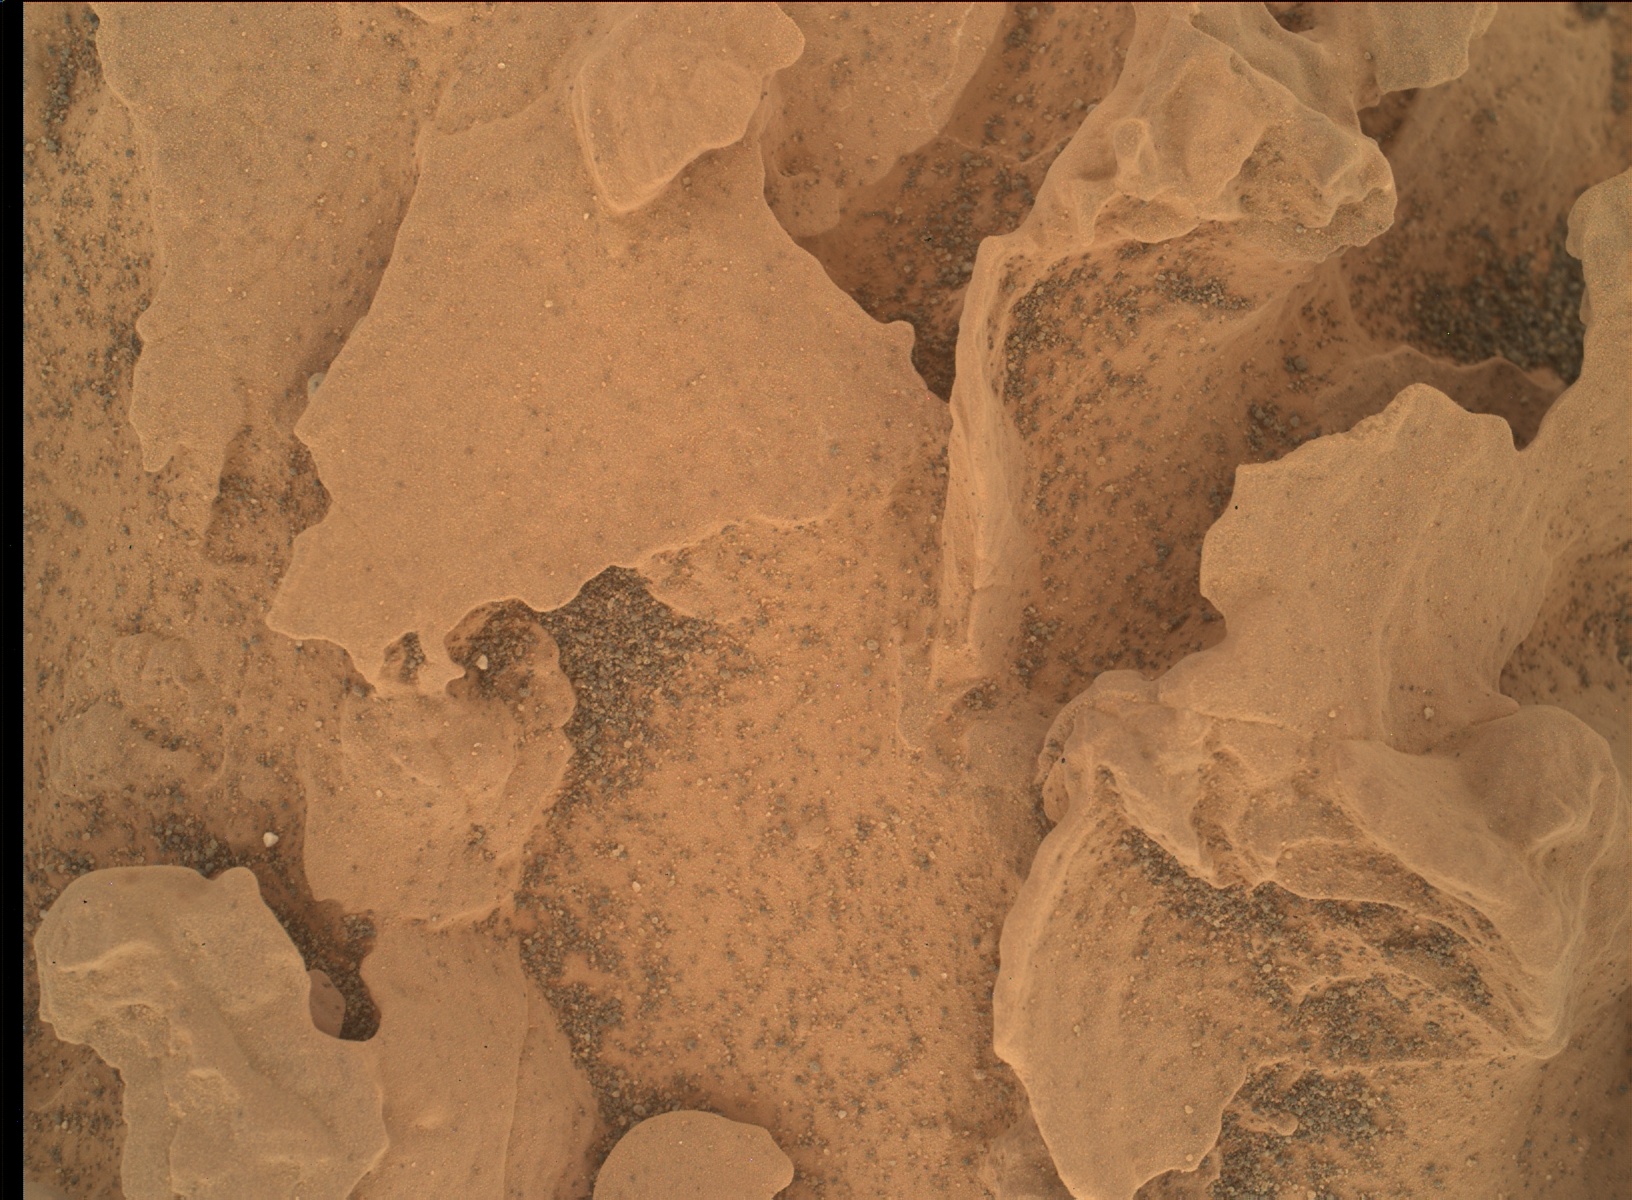 Nasa's Mars rover Curiosity acquired this image using its Mars Hand Lens Imager (MAHLI) on Sol 1800